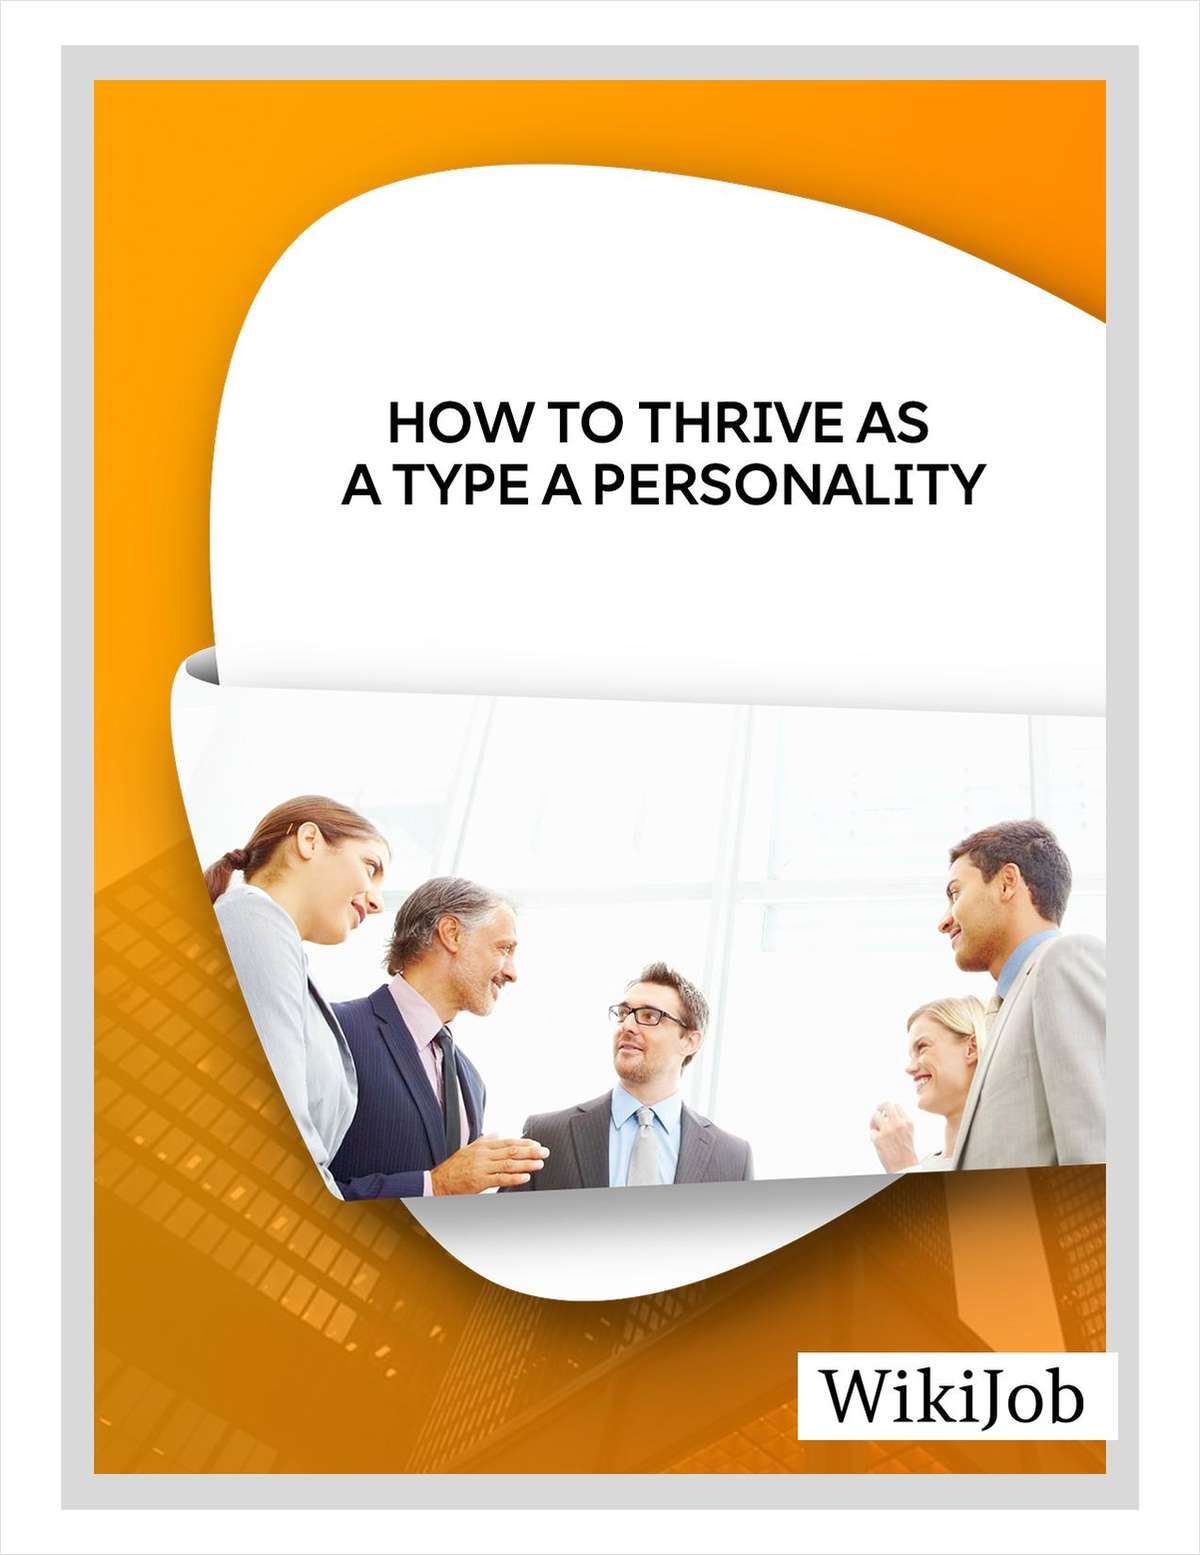 How to Thrive as a Type A Personality